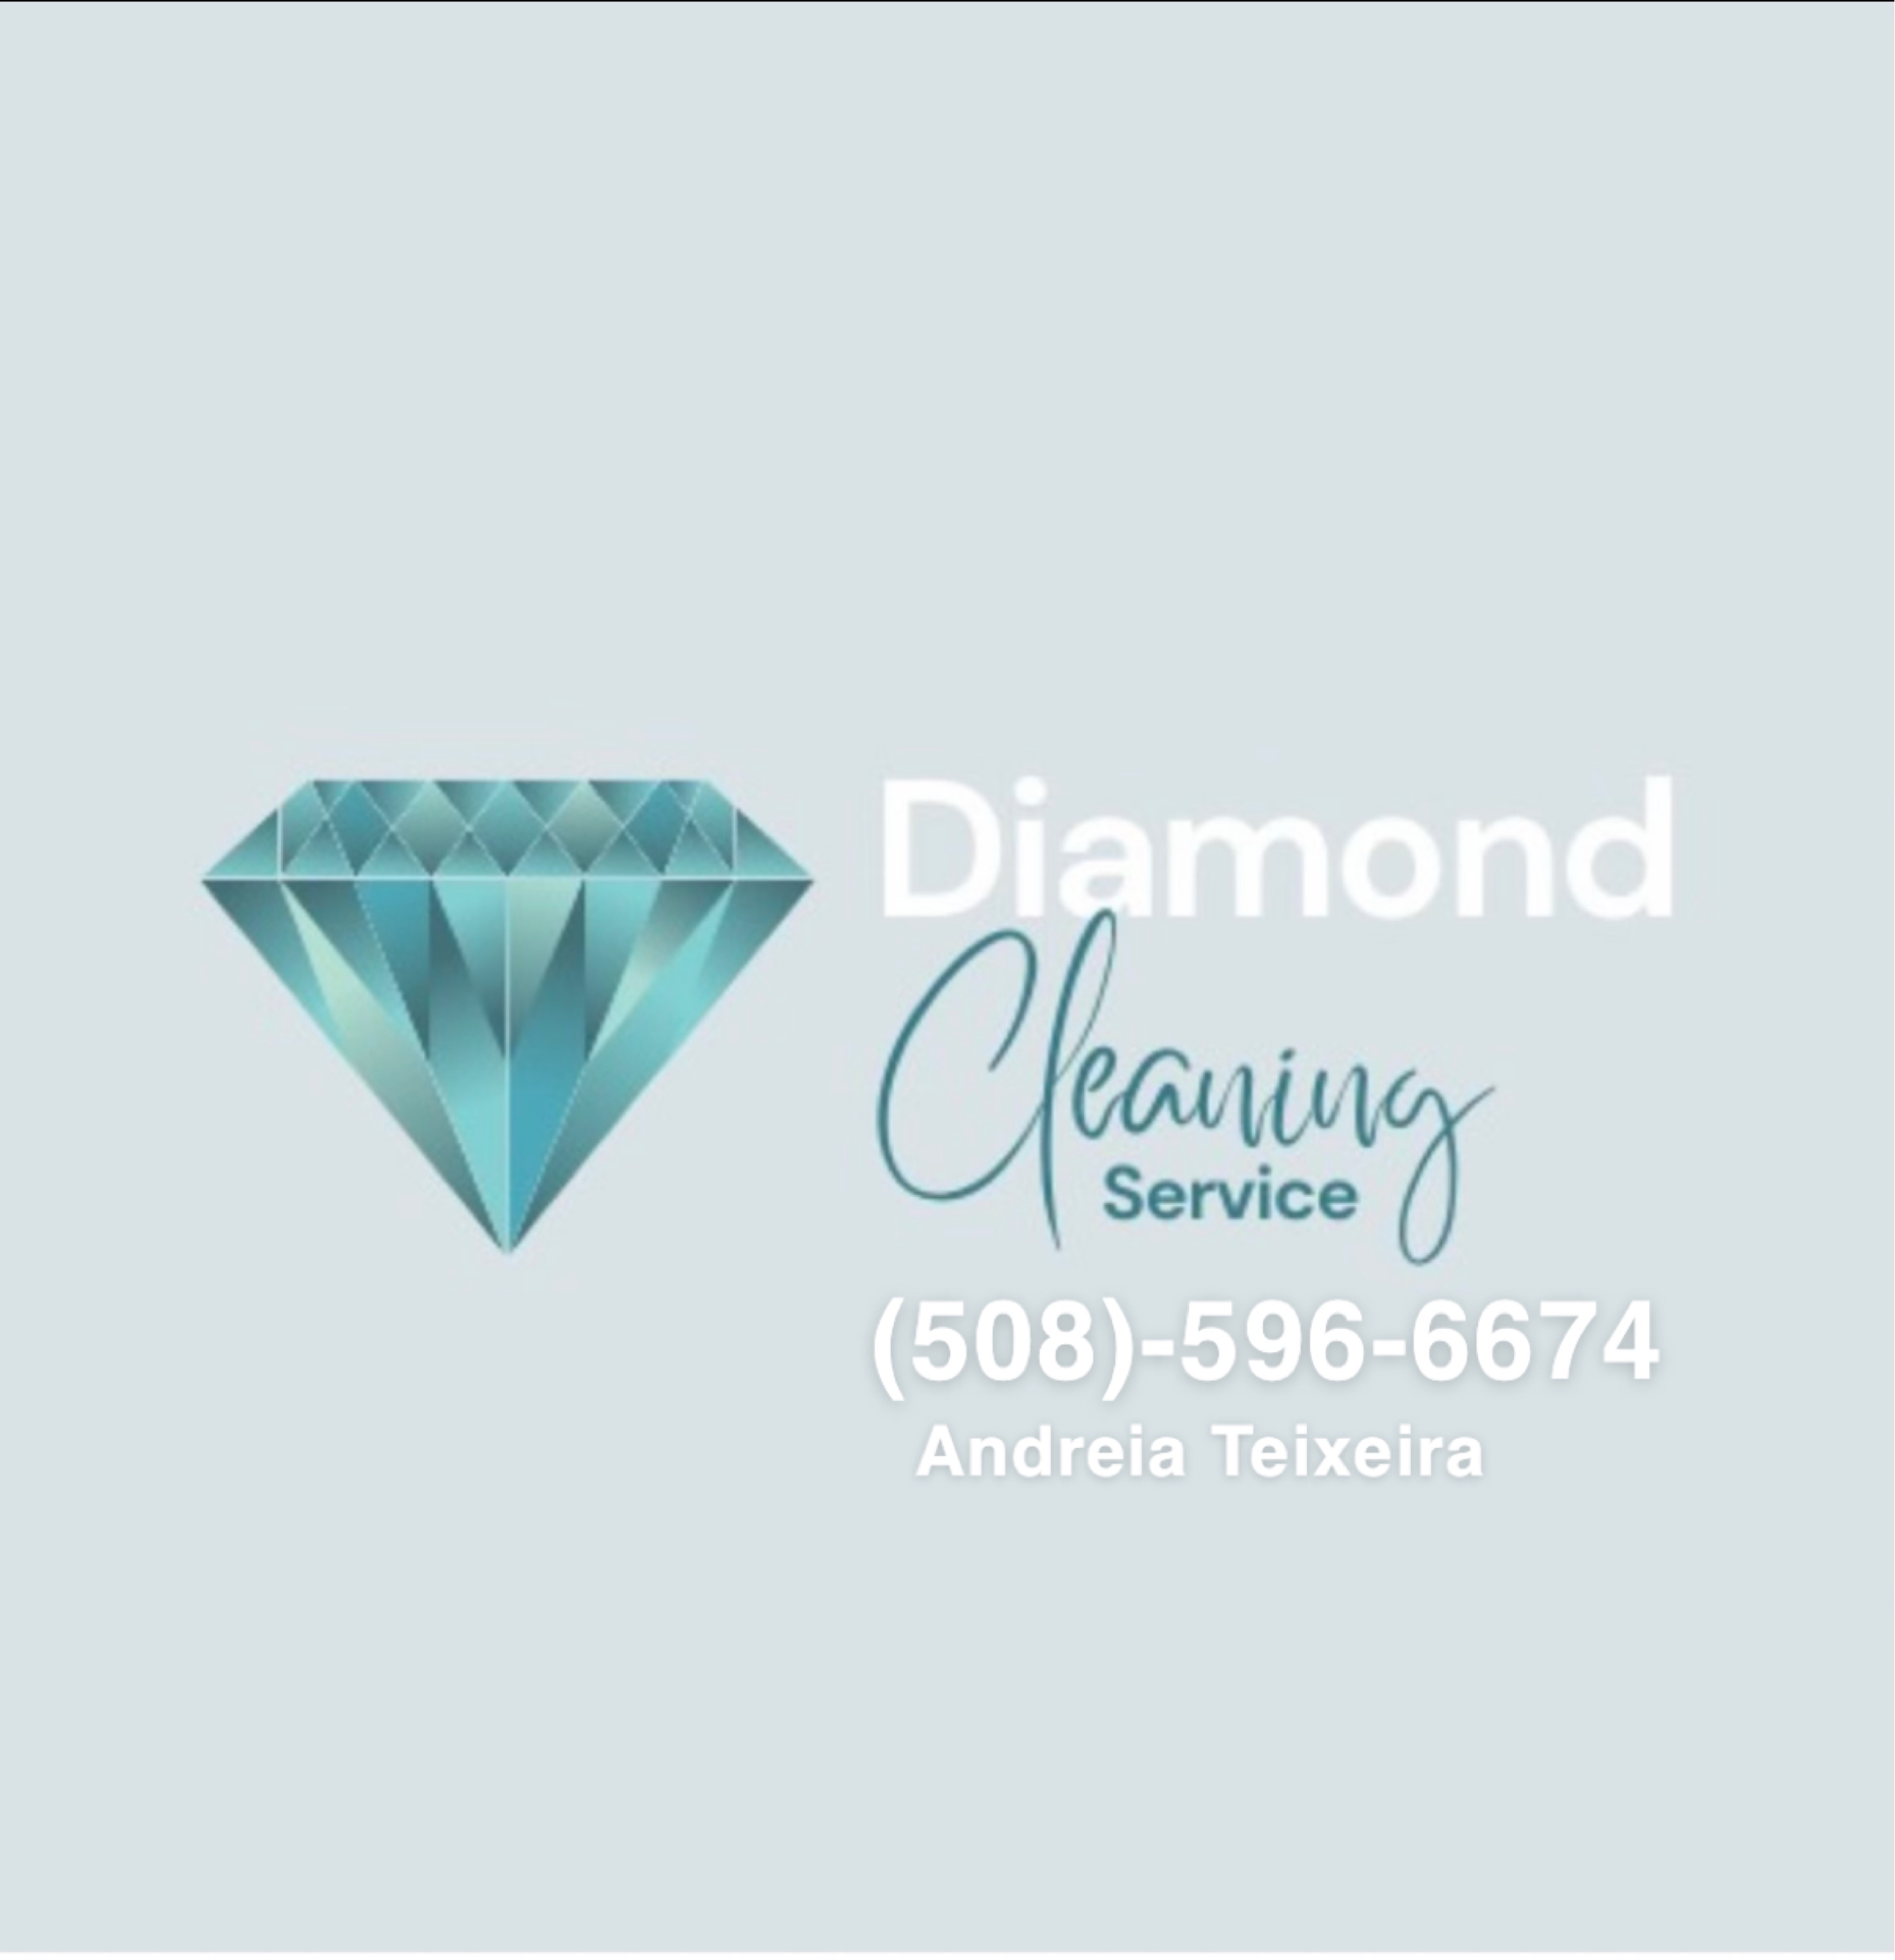 Diamond Cleaning Services Logo